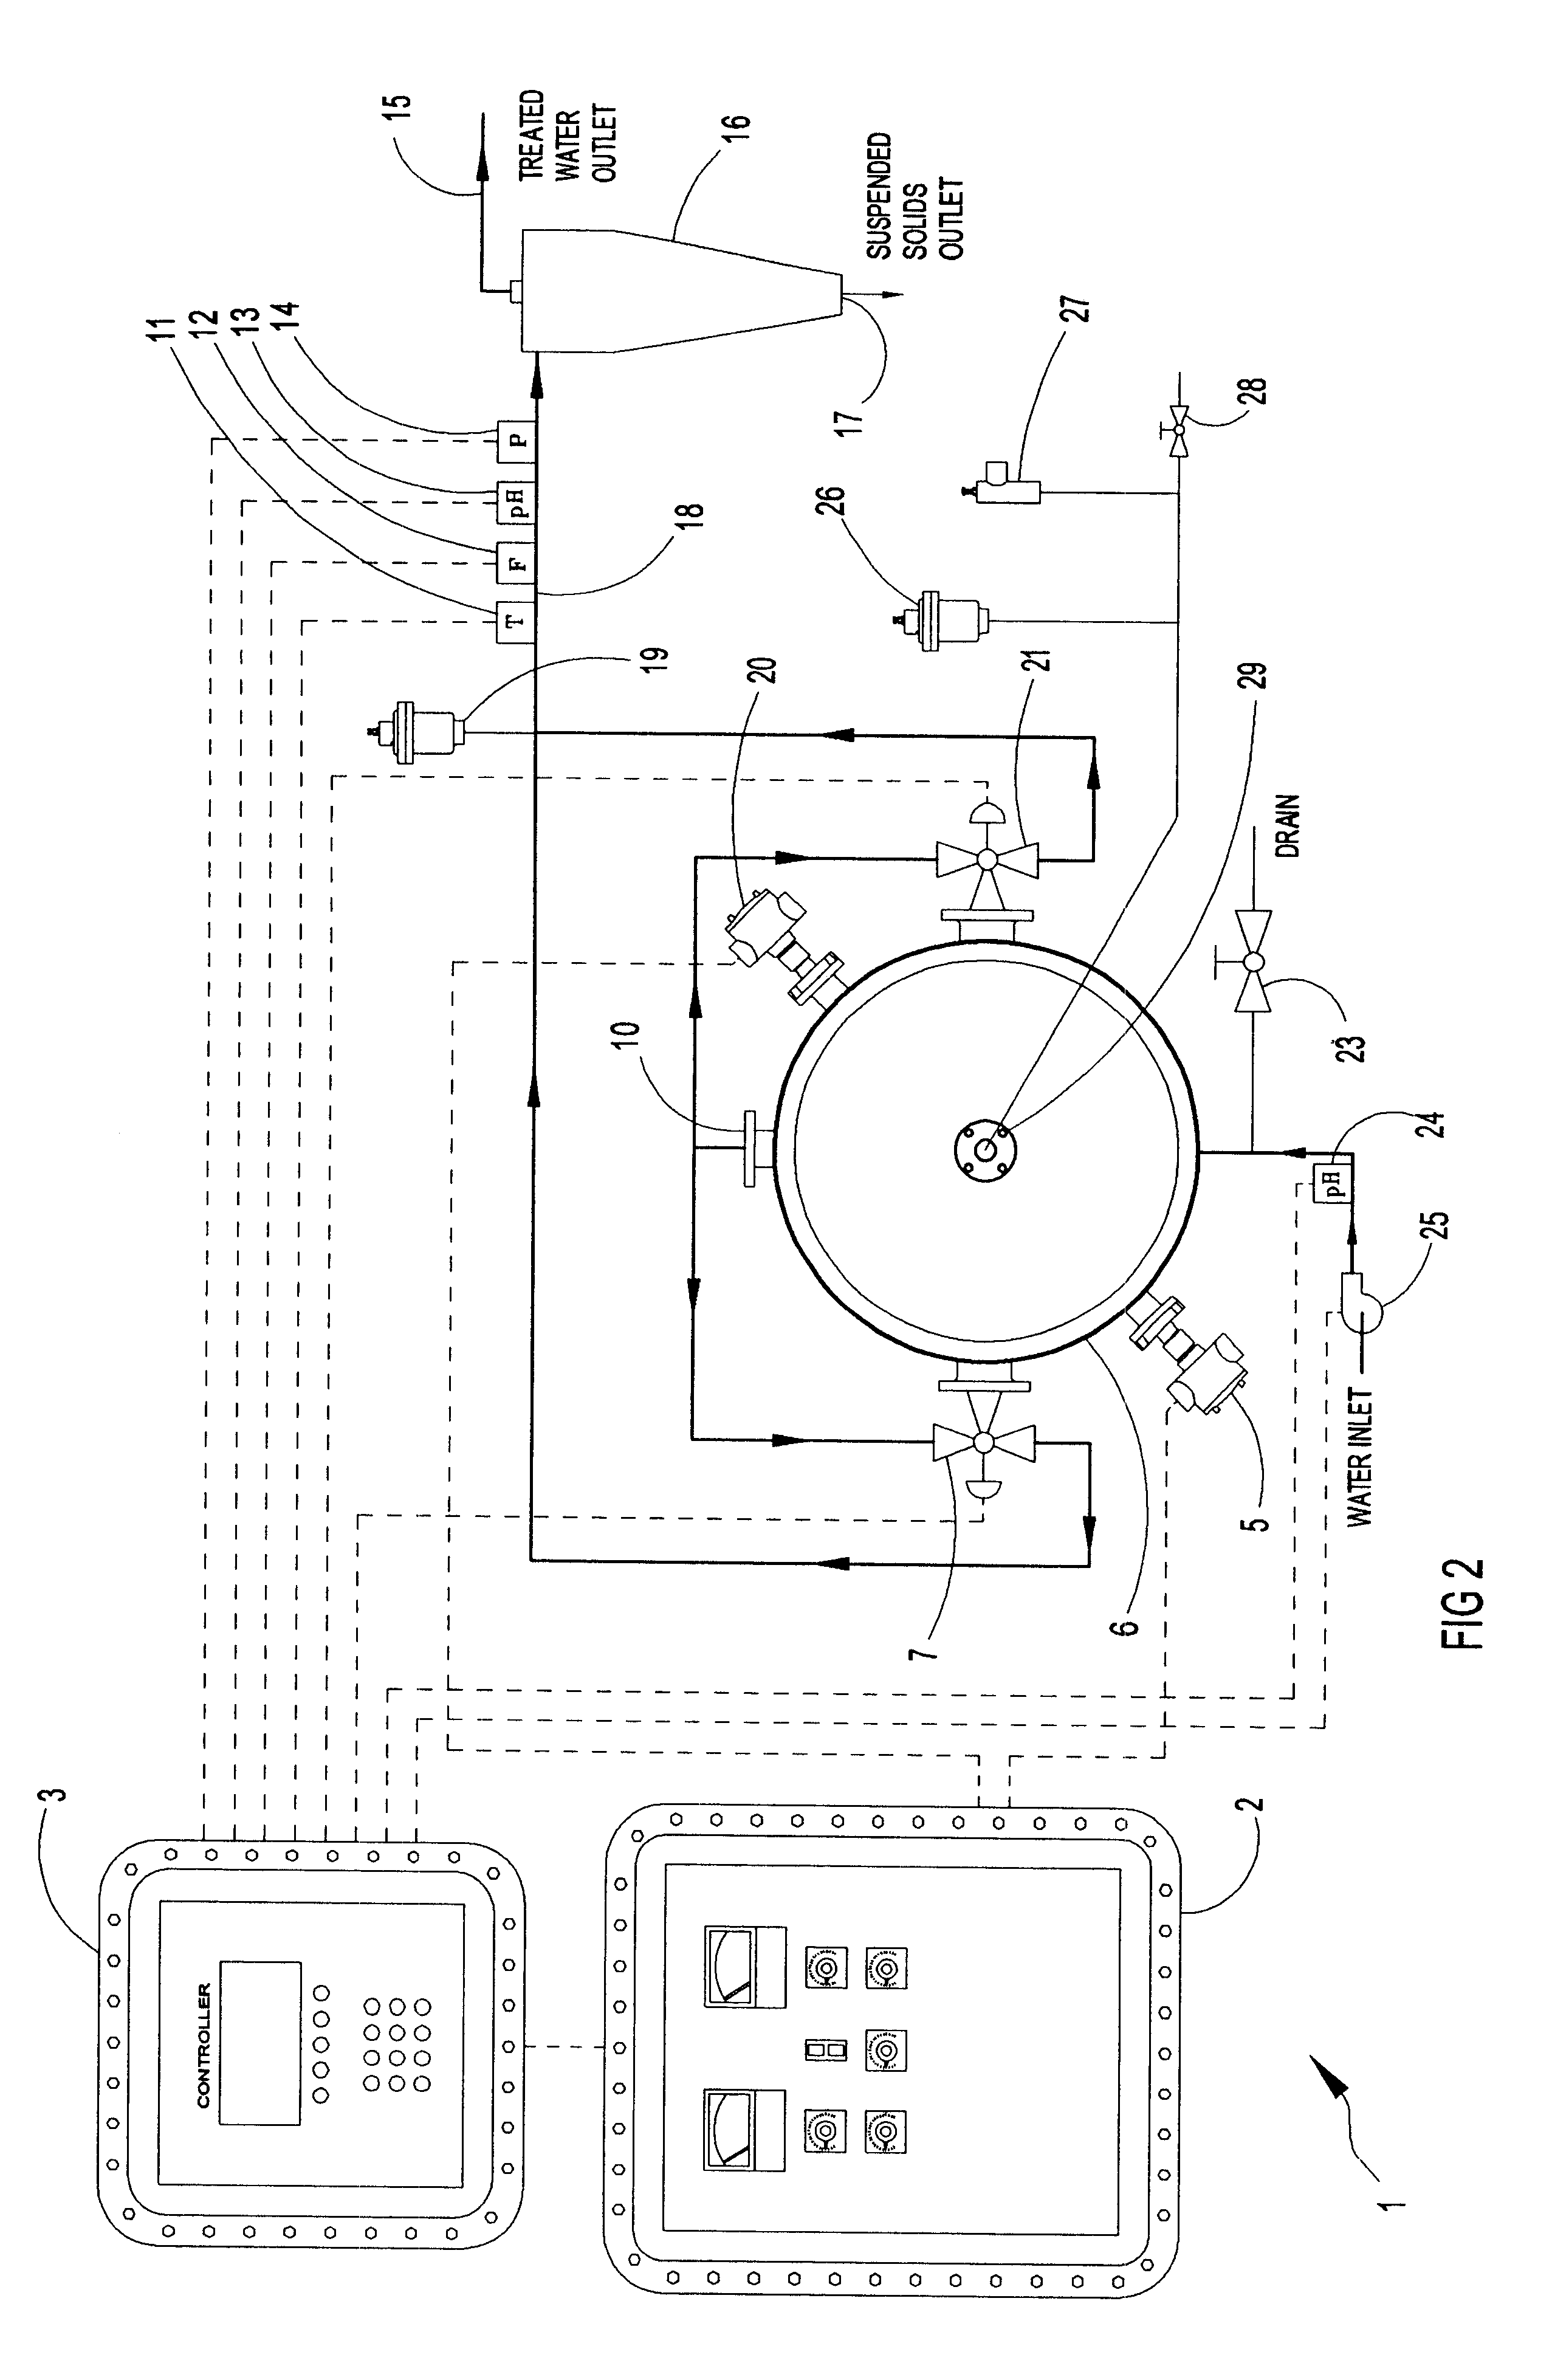 Apparatus for removing dissolved metals from wastewater by electrocoagulation